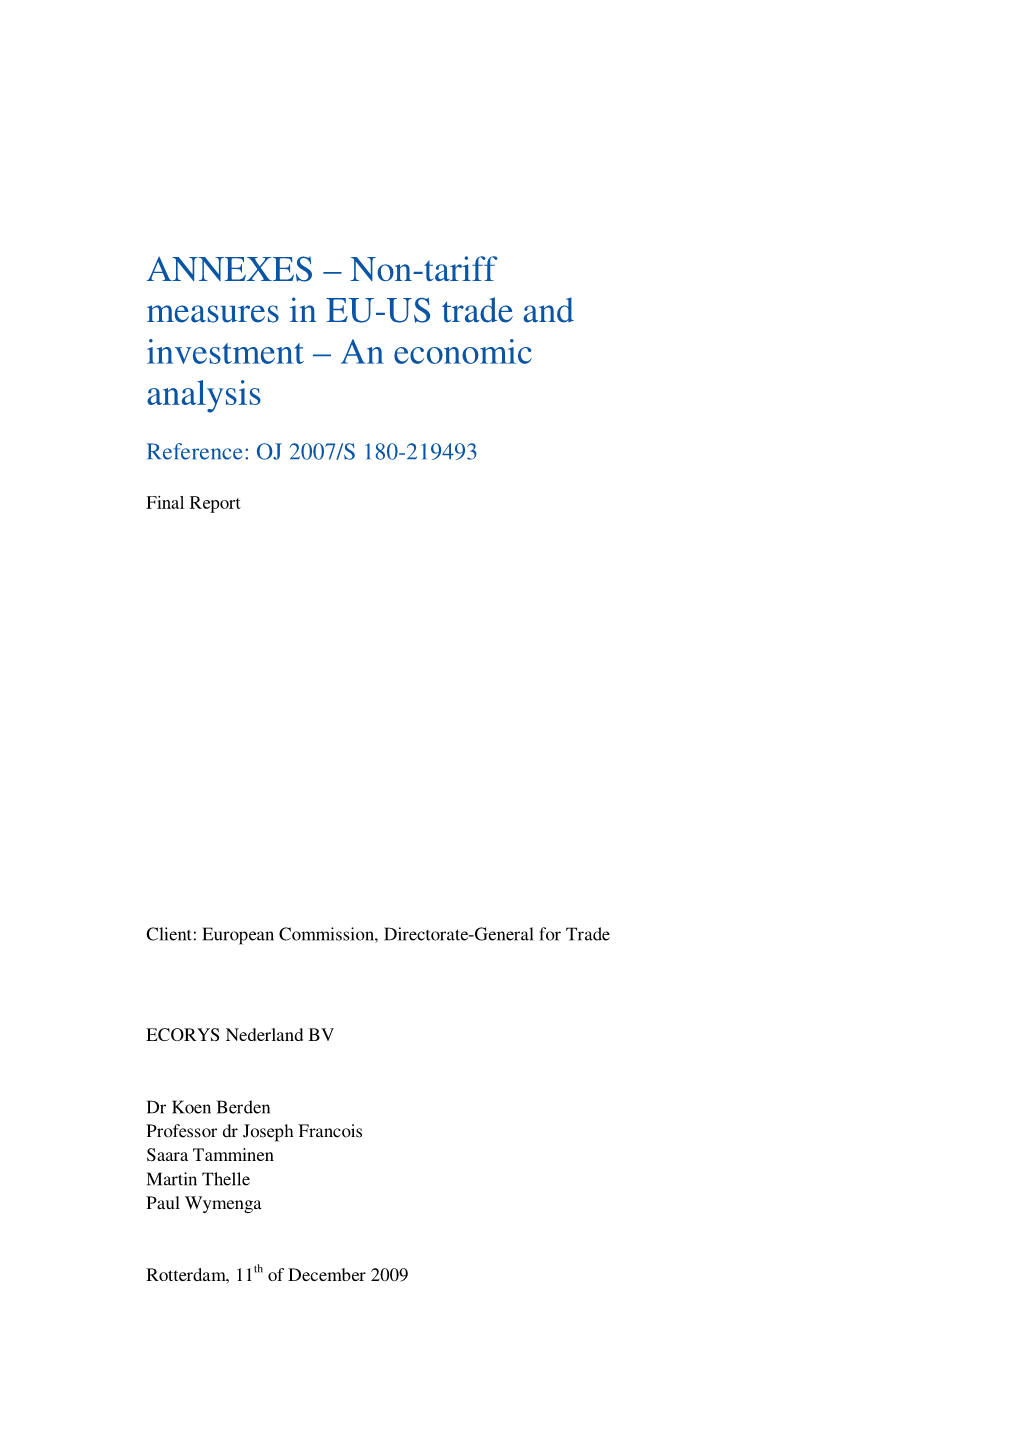 ANNEXES – Non-Tariff Measures in EU-US Trade and Investment – an Economic Analysis